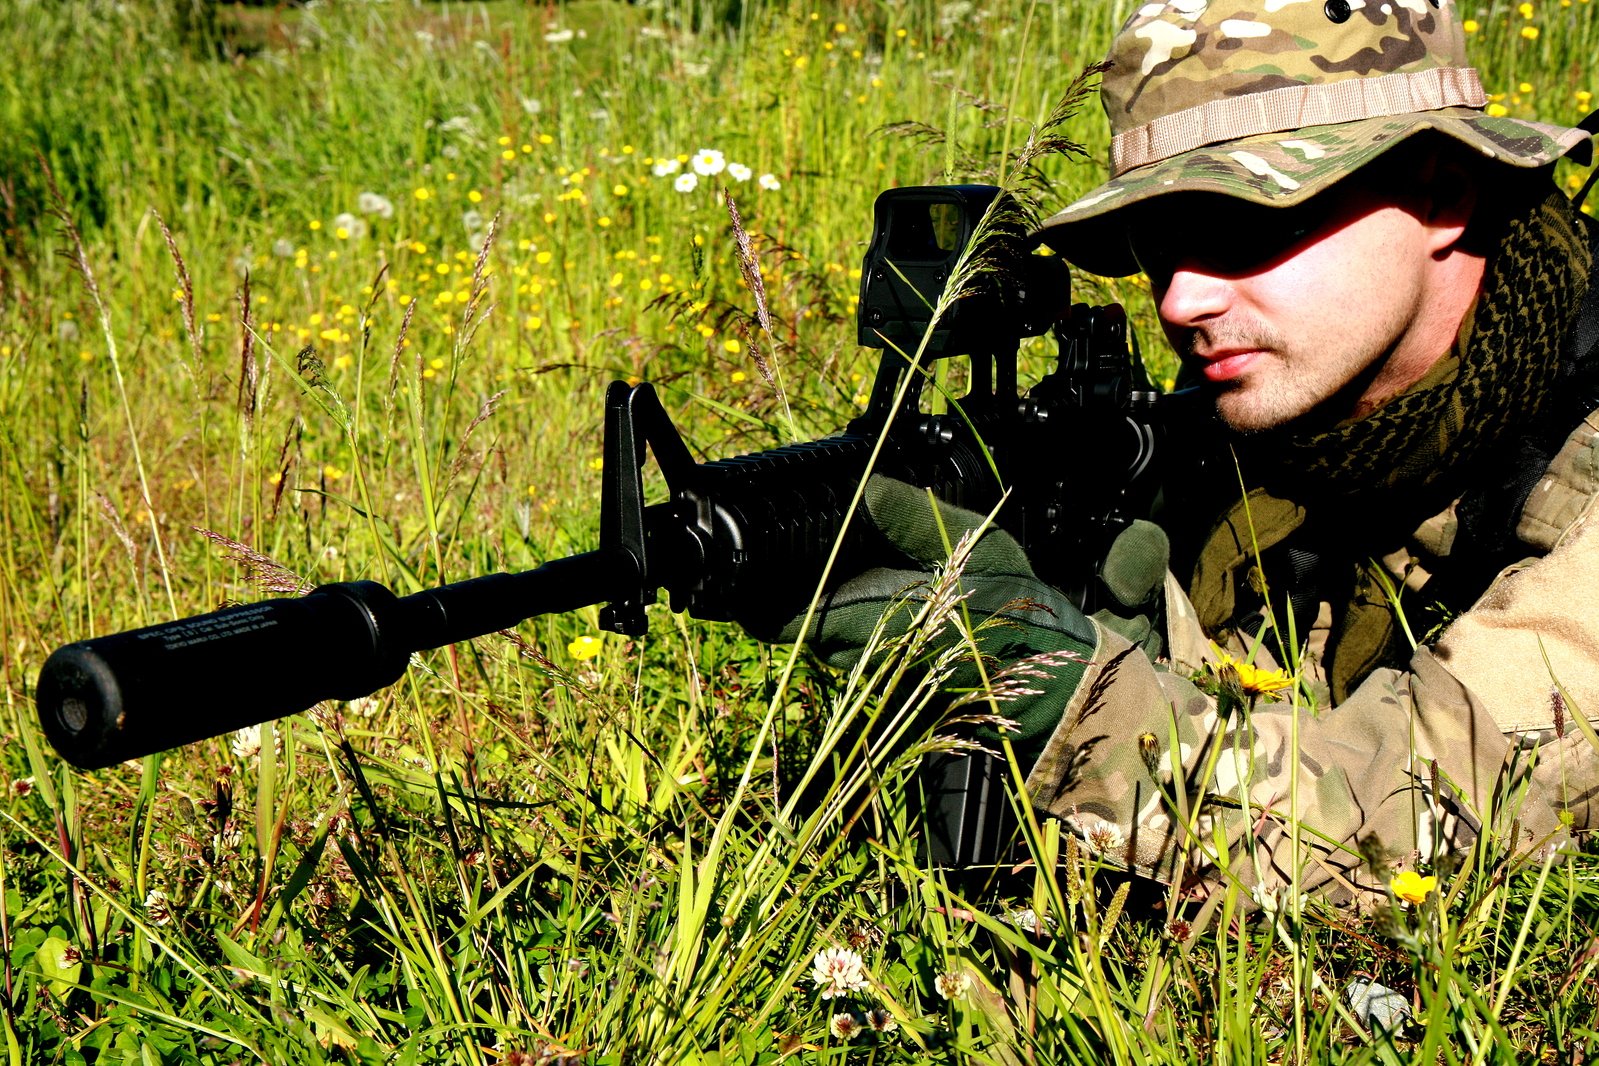 a soldier is posing for the camera in a grassy field